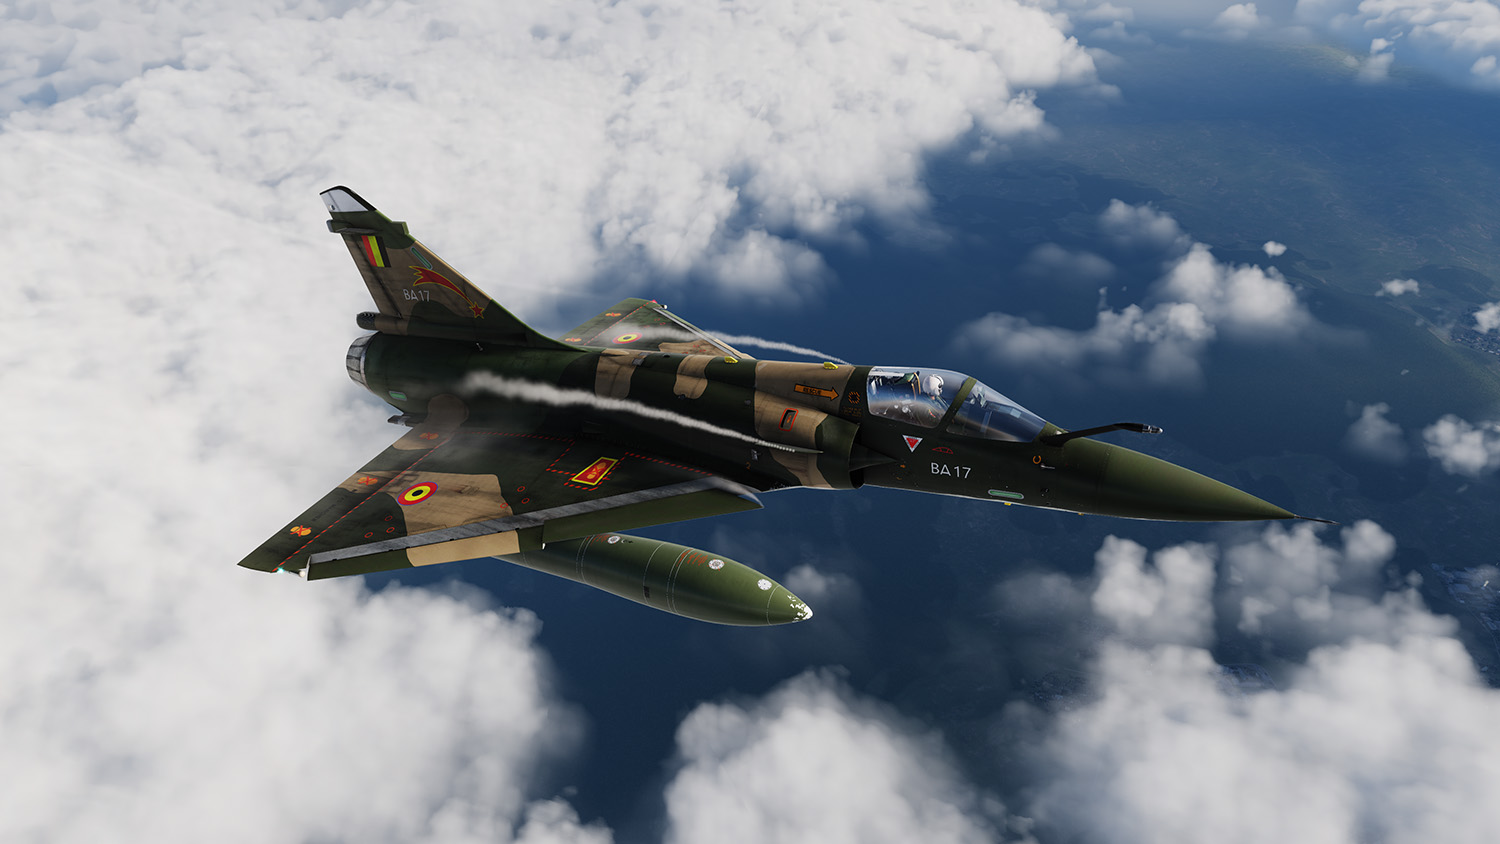 Fictional "What-if" - Belgian Air Force Mirage 2000 (In early Mirage 5BA livery colors)